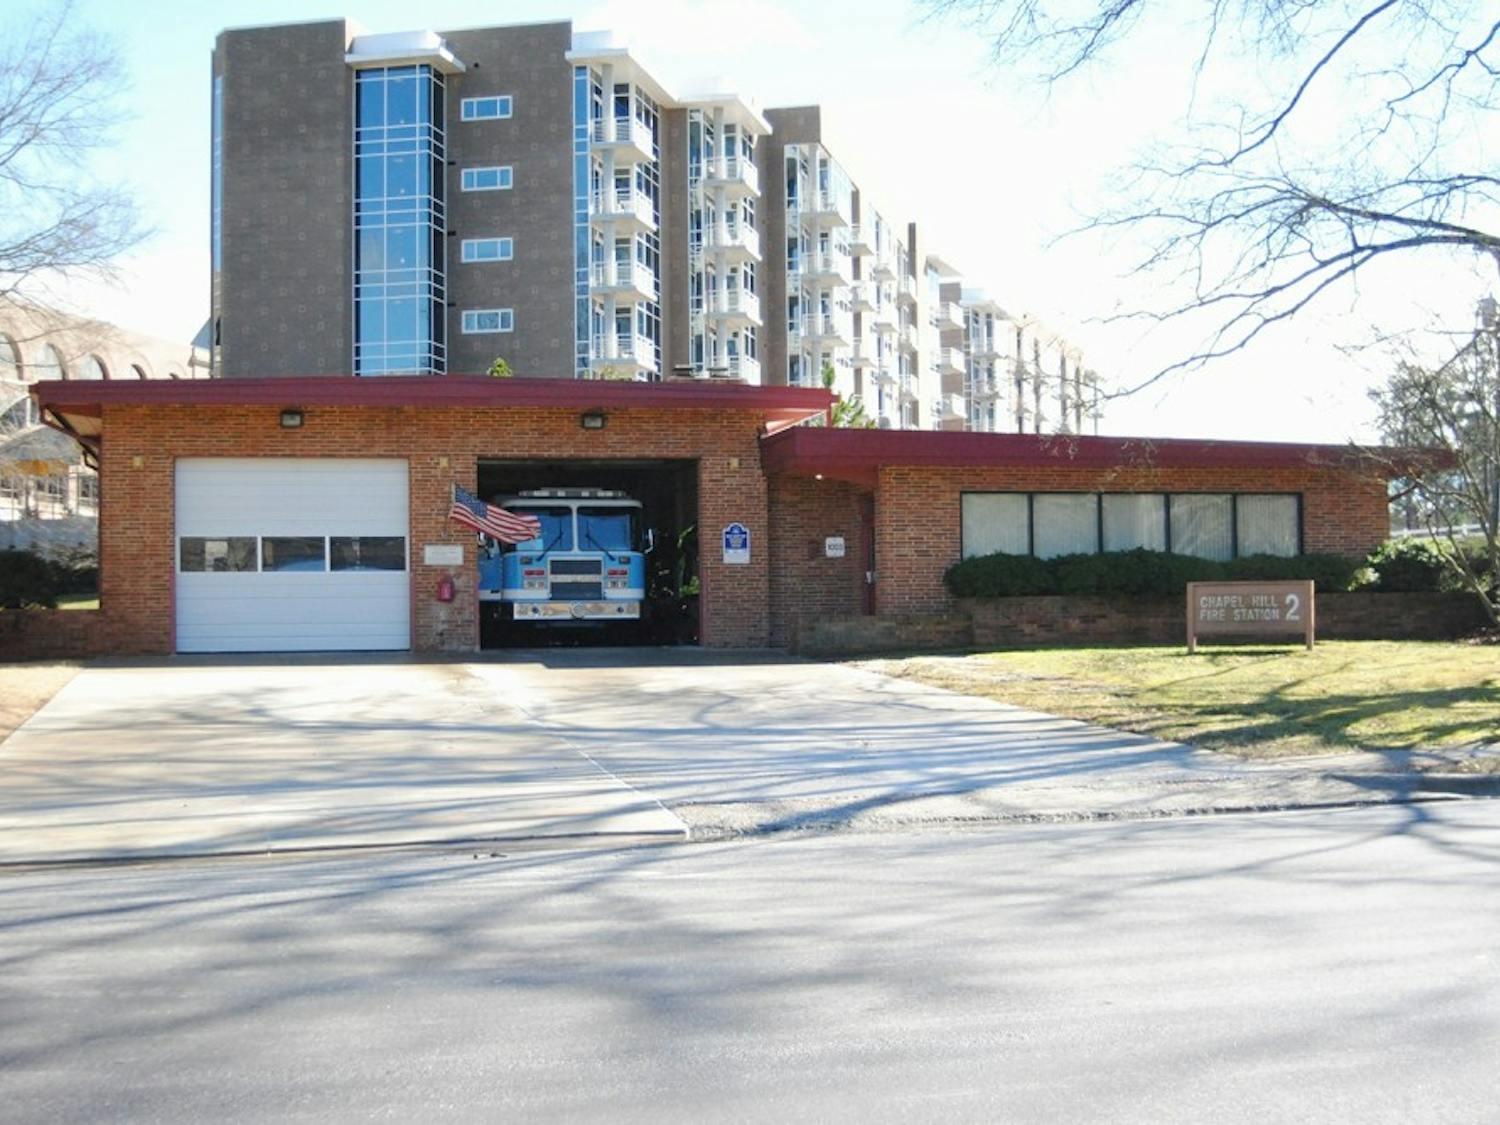 The Chapel Hill Fire Department has five stations, one of which is on Hamilton Road.